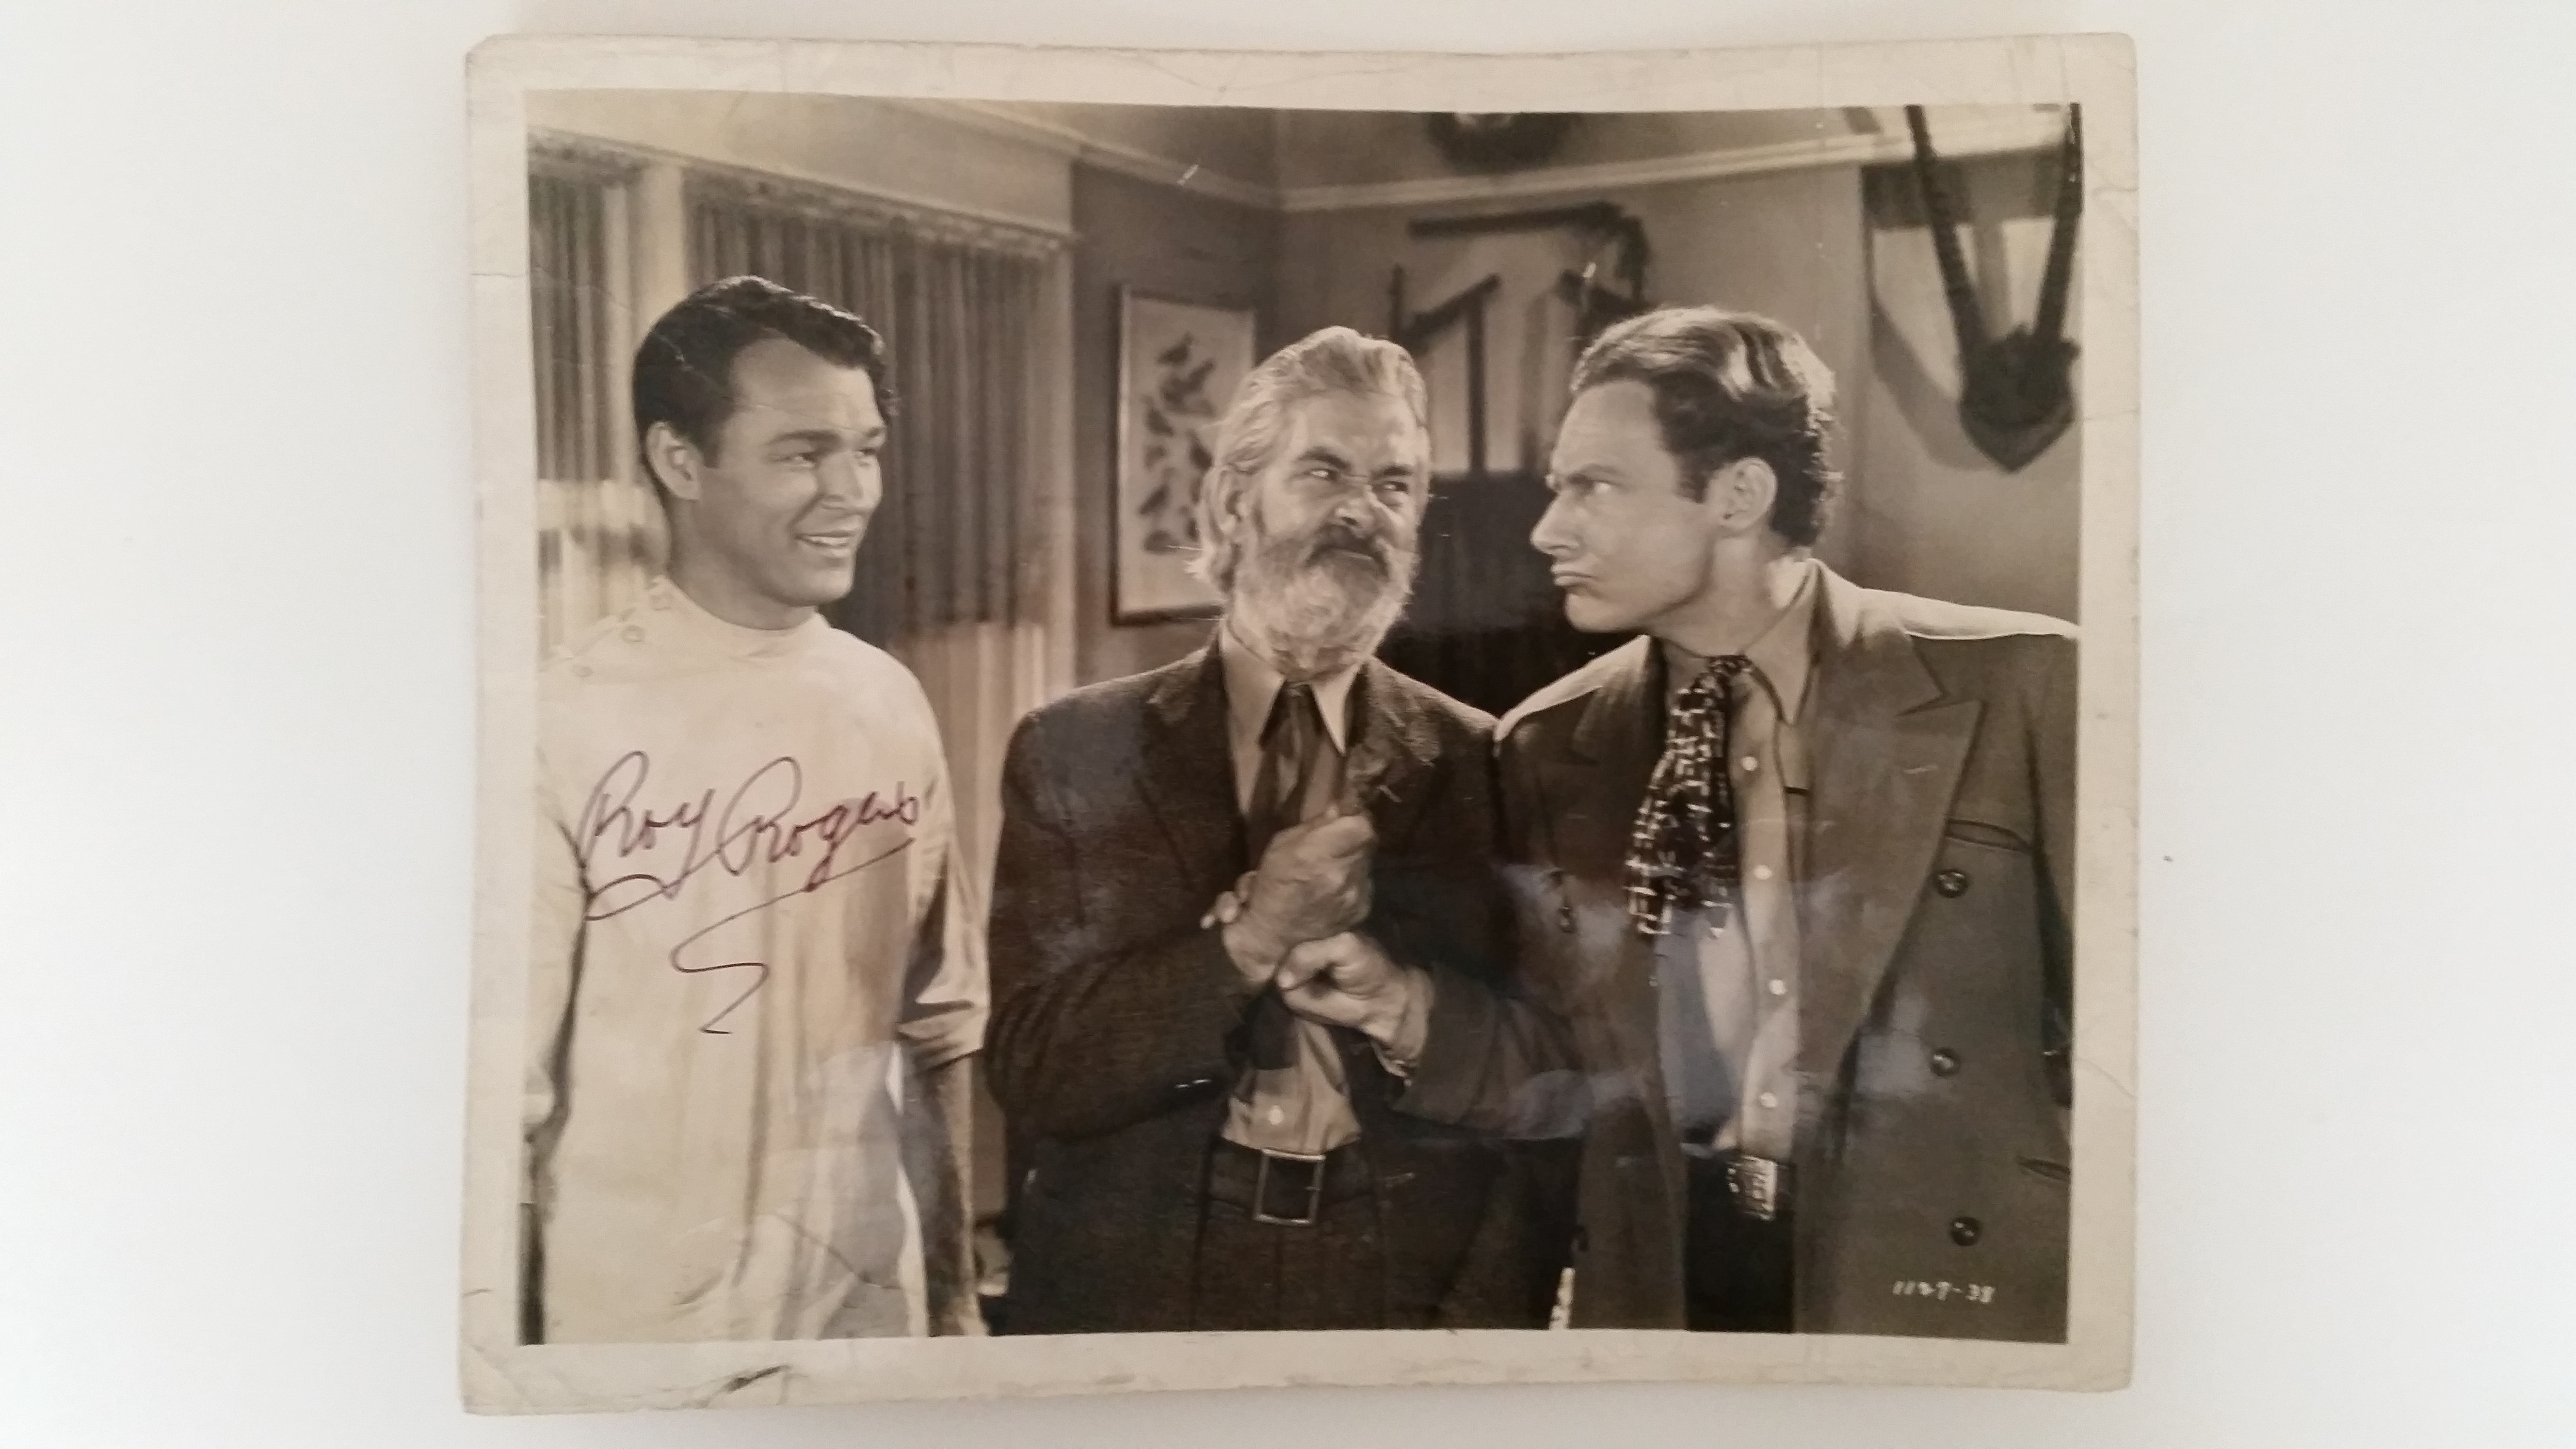 CINEMA, signed press photos, inc. Roy Rogers, Kathlyn Harrison & Jack Warner, 8 x 10, P (1, taped to - Image 2 of 2